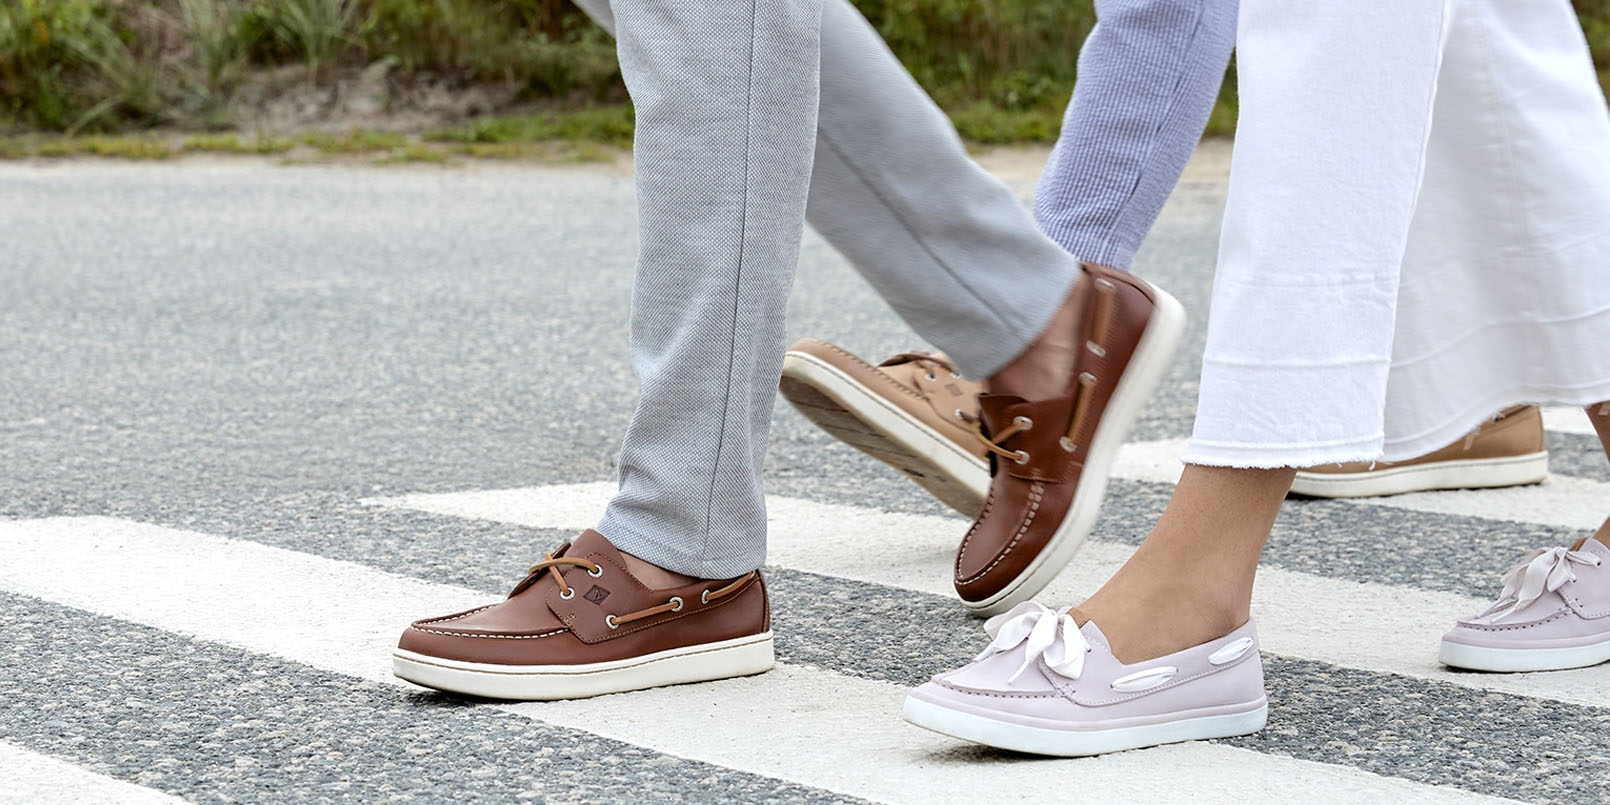 Sperry shoes for men and women up to 60 